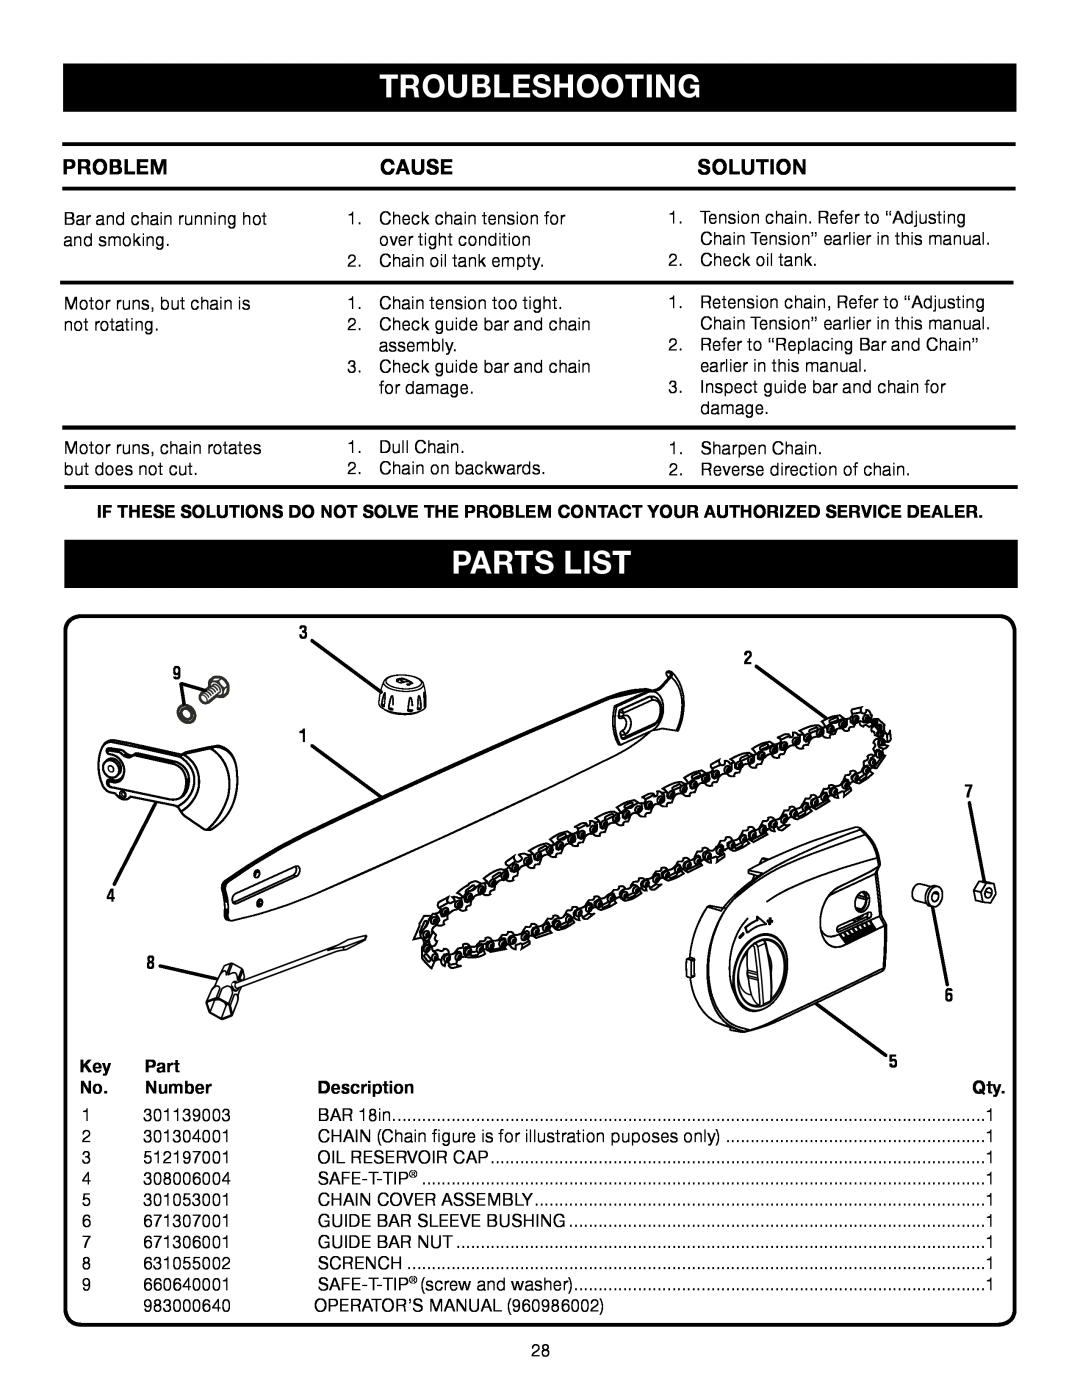 Ryobi RY43006 manual Troubleshooting, Parts List, Problem, Cause, Solution, Number, Description 